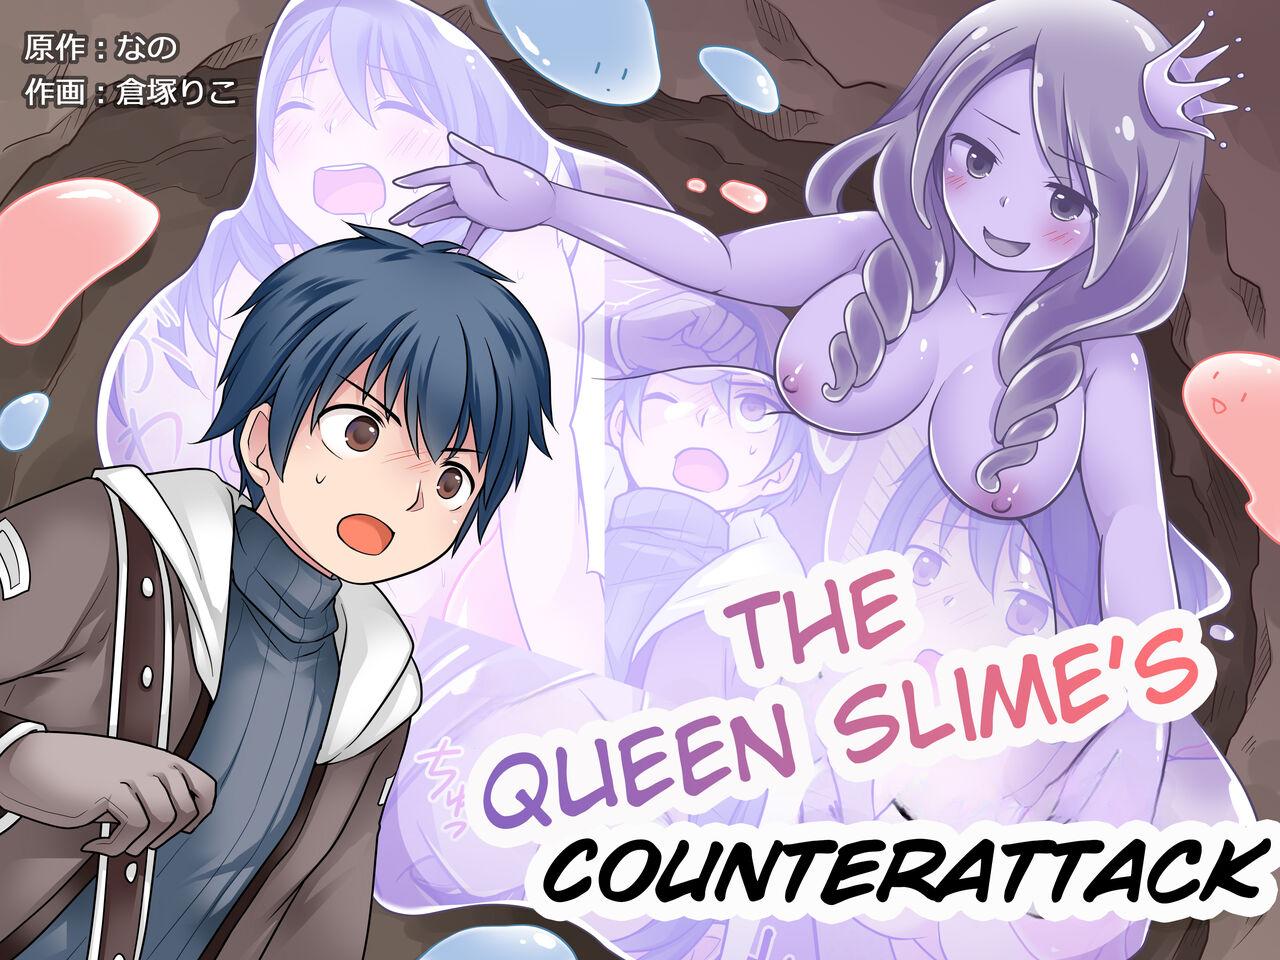 Phat Queen Slime no Gyakushuu | The Queen Slime's Counterattack - Original Thylinh - Page 1